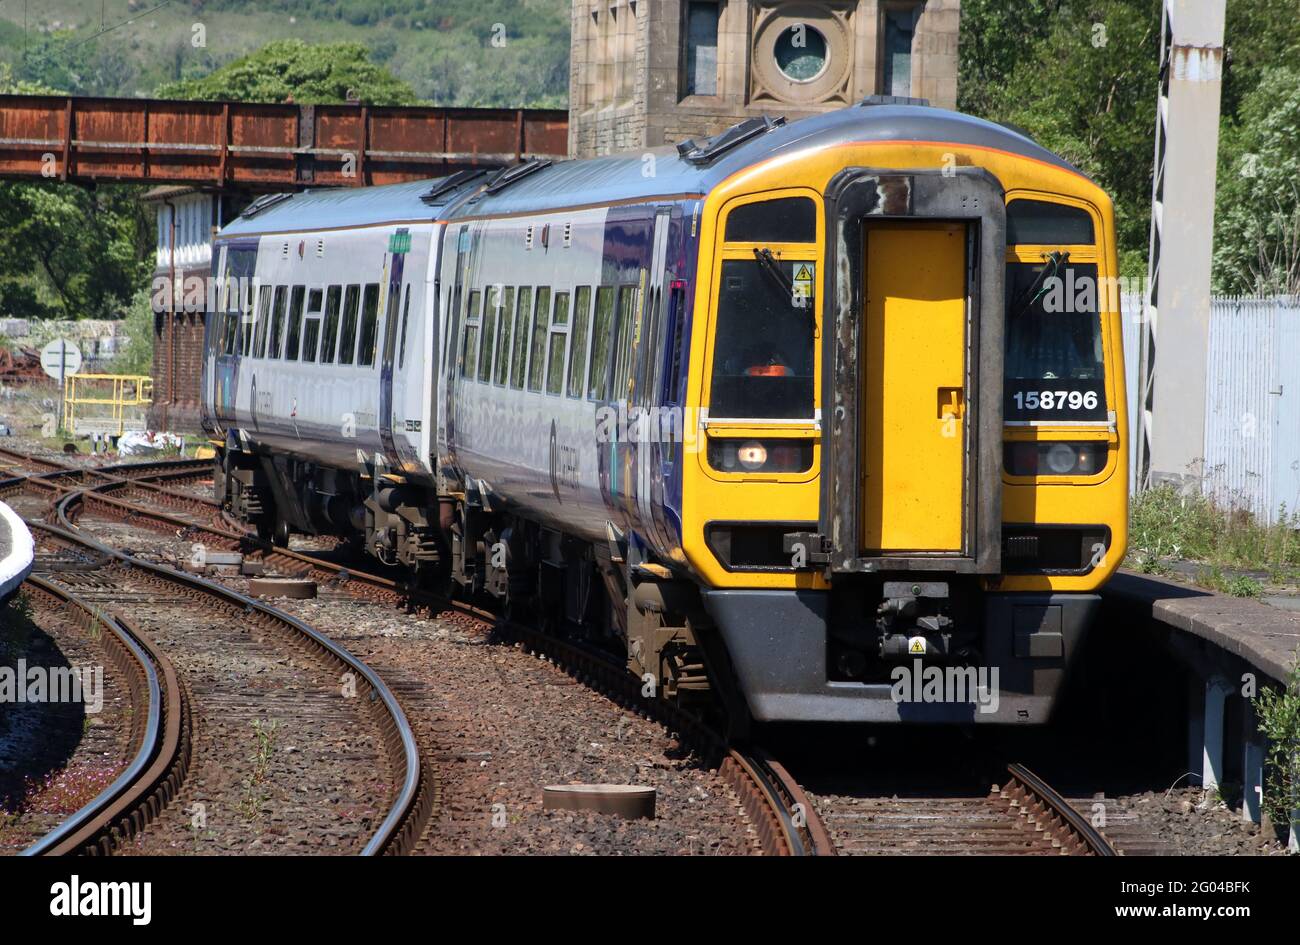 Class 158 two car express sprinter dmu, unit number 158 796, in Northern livery arriving at Carnforth station platform 1 on Monday 31st May 2021. Stock Photo